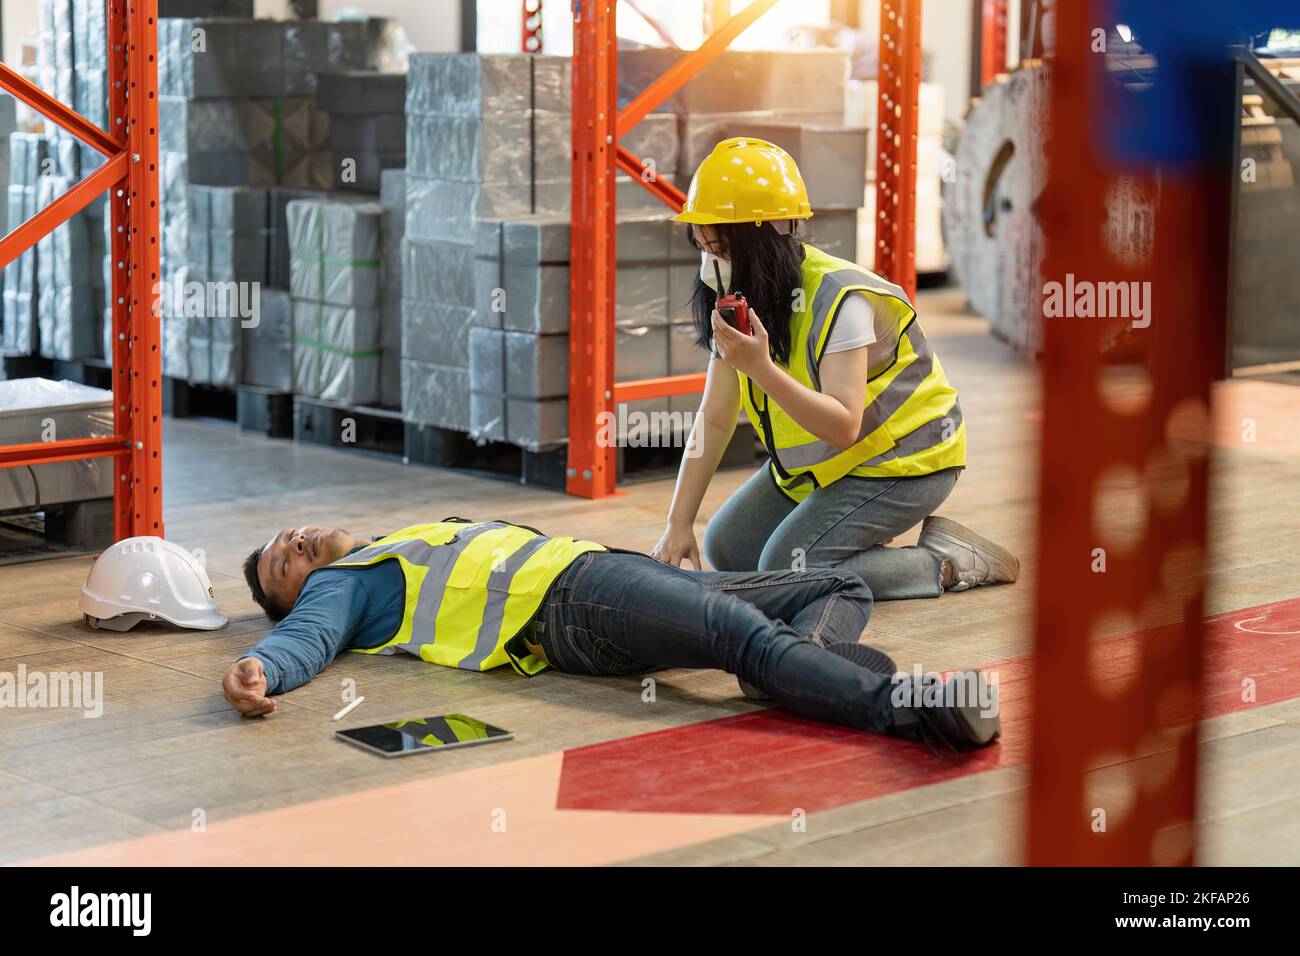 First aid by workmate. Working at warehouse. Male warehouse worker have accident. Stock Photo